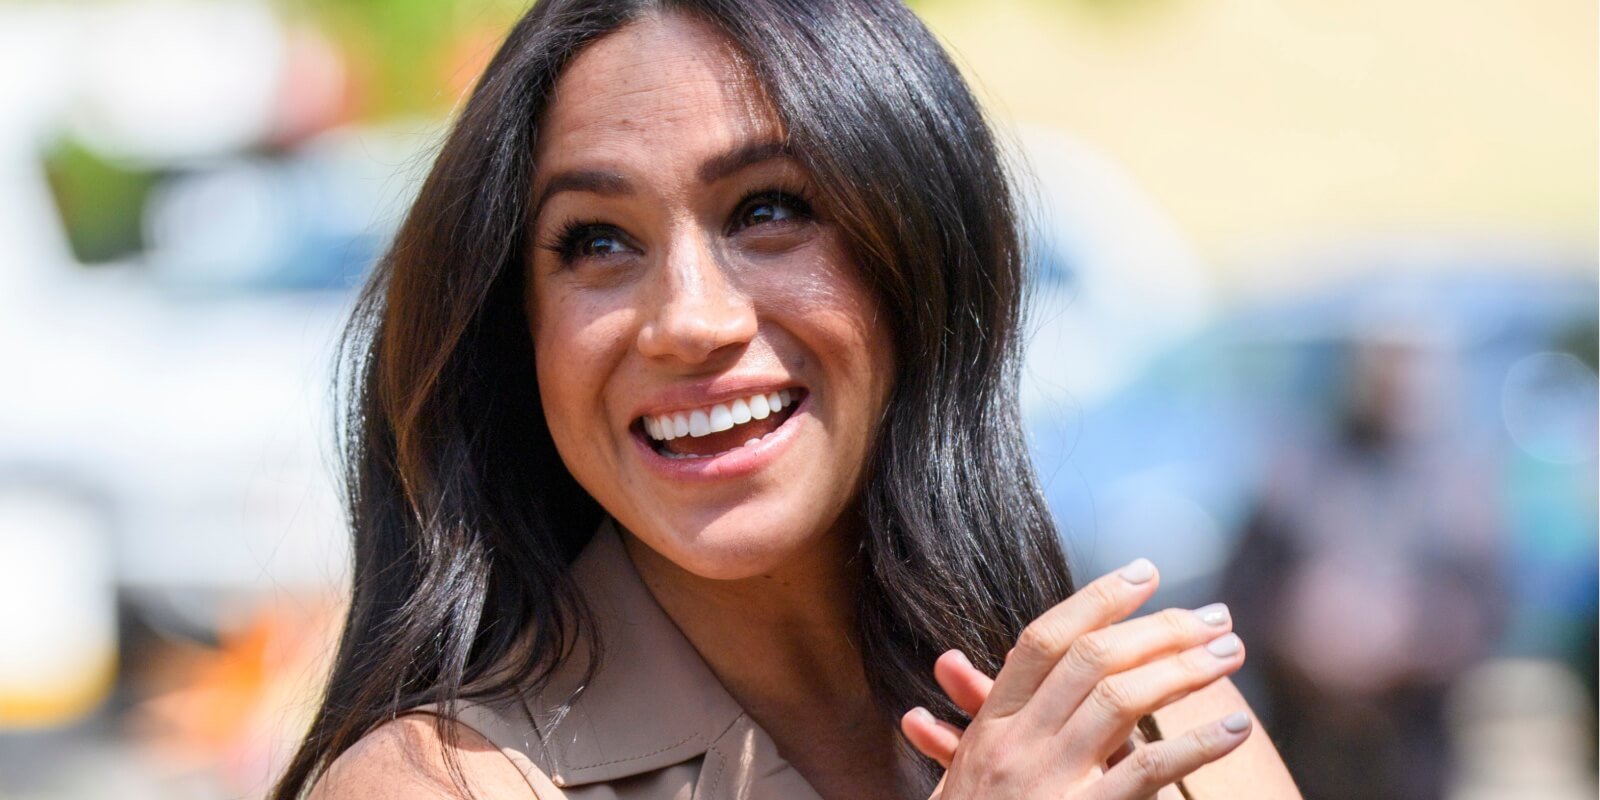 Meghan Markle smiles in a 2019 photograph.